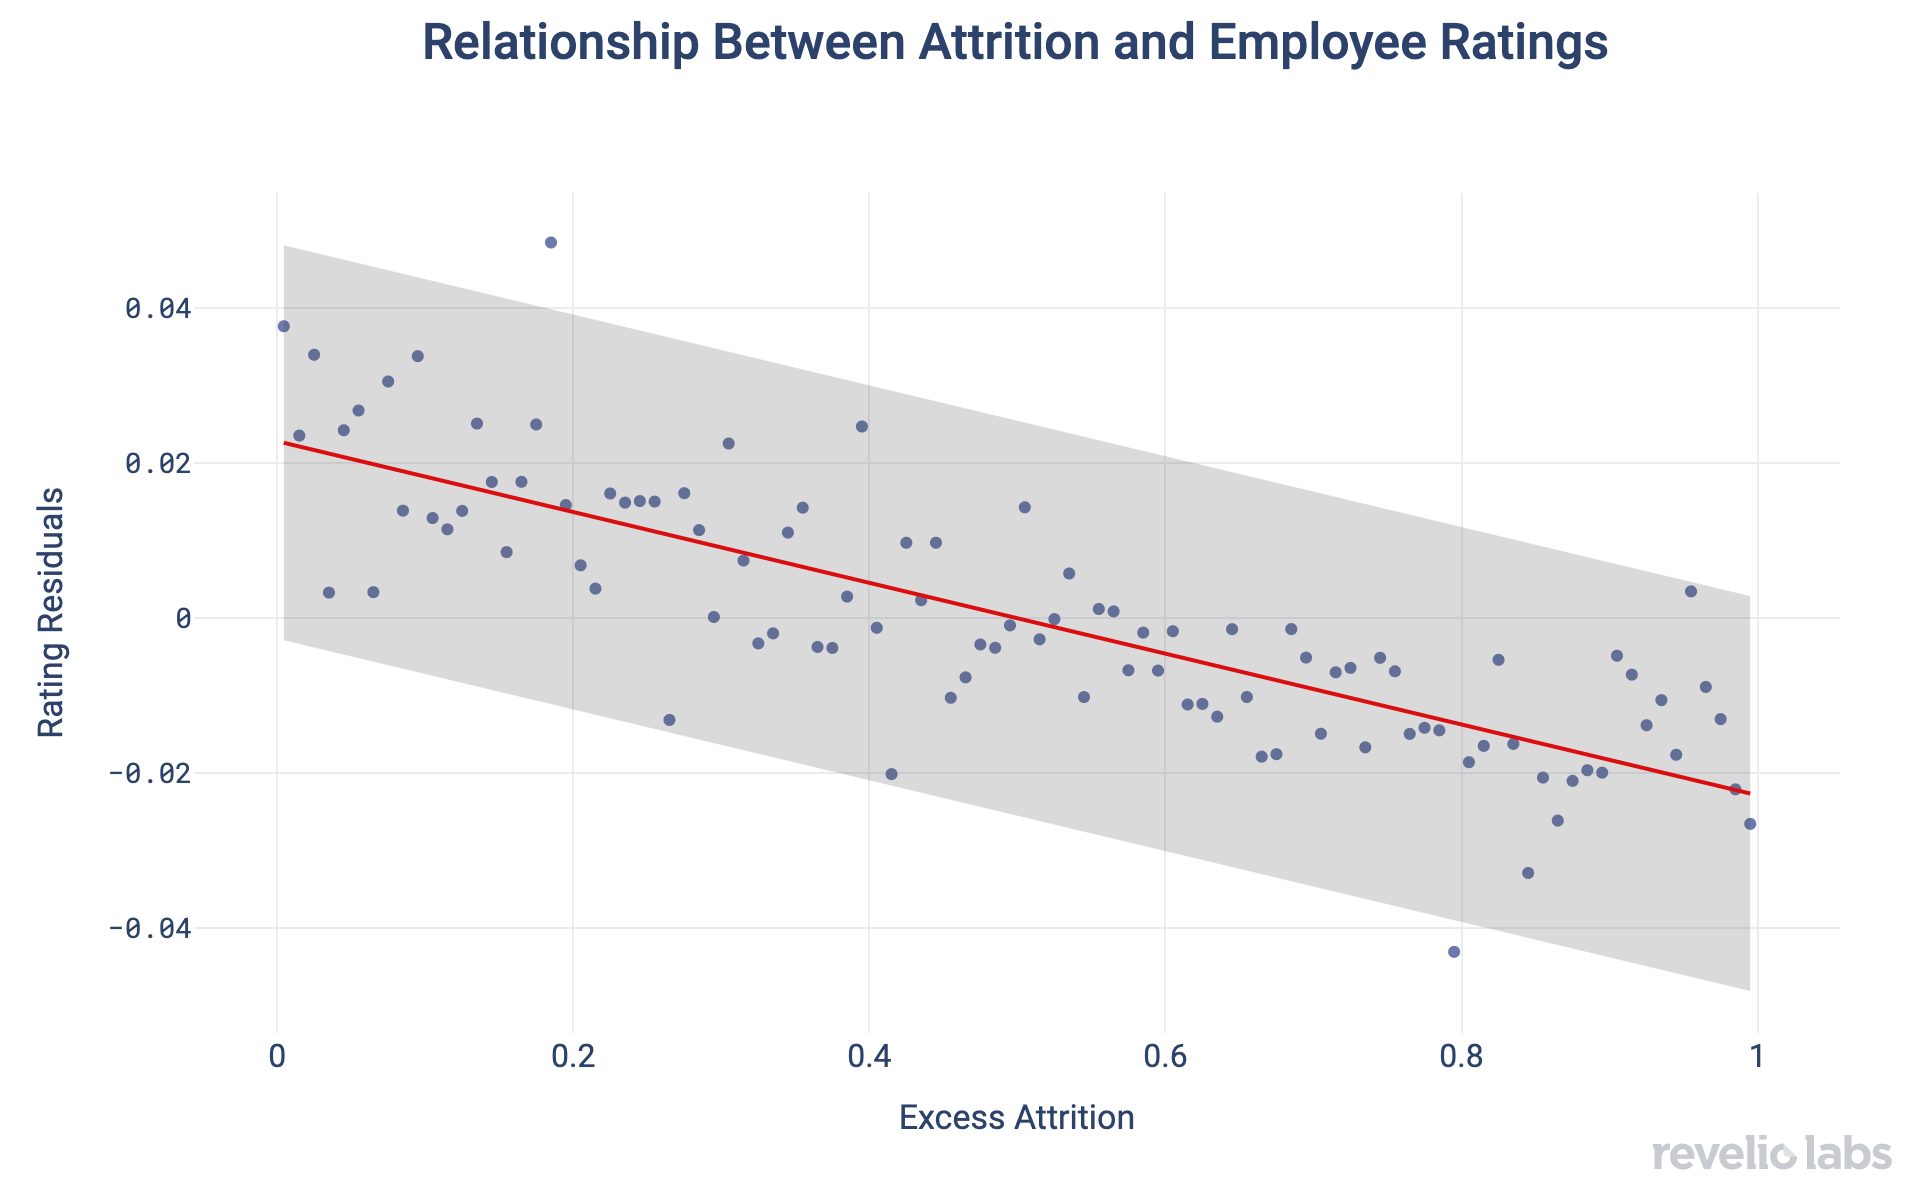 Relationship Between Attrition and Employee Rating